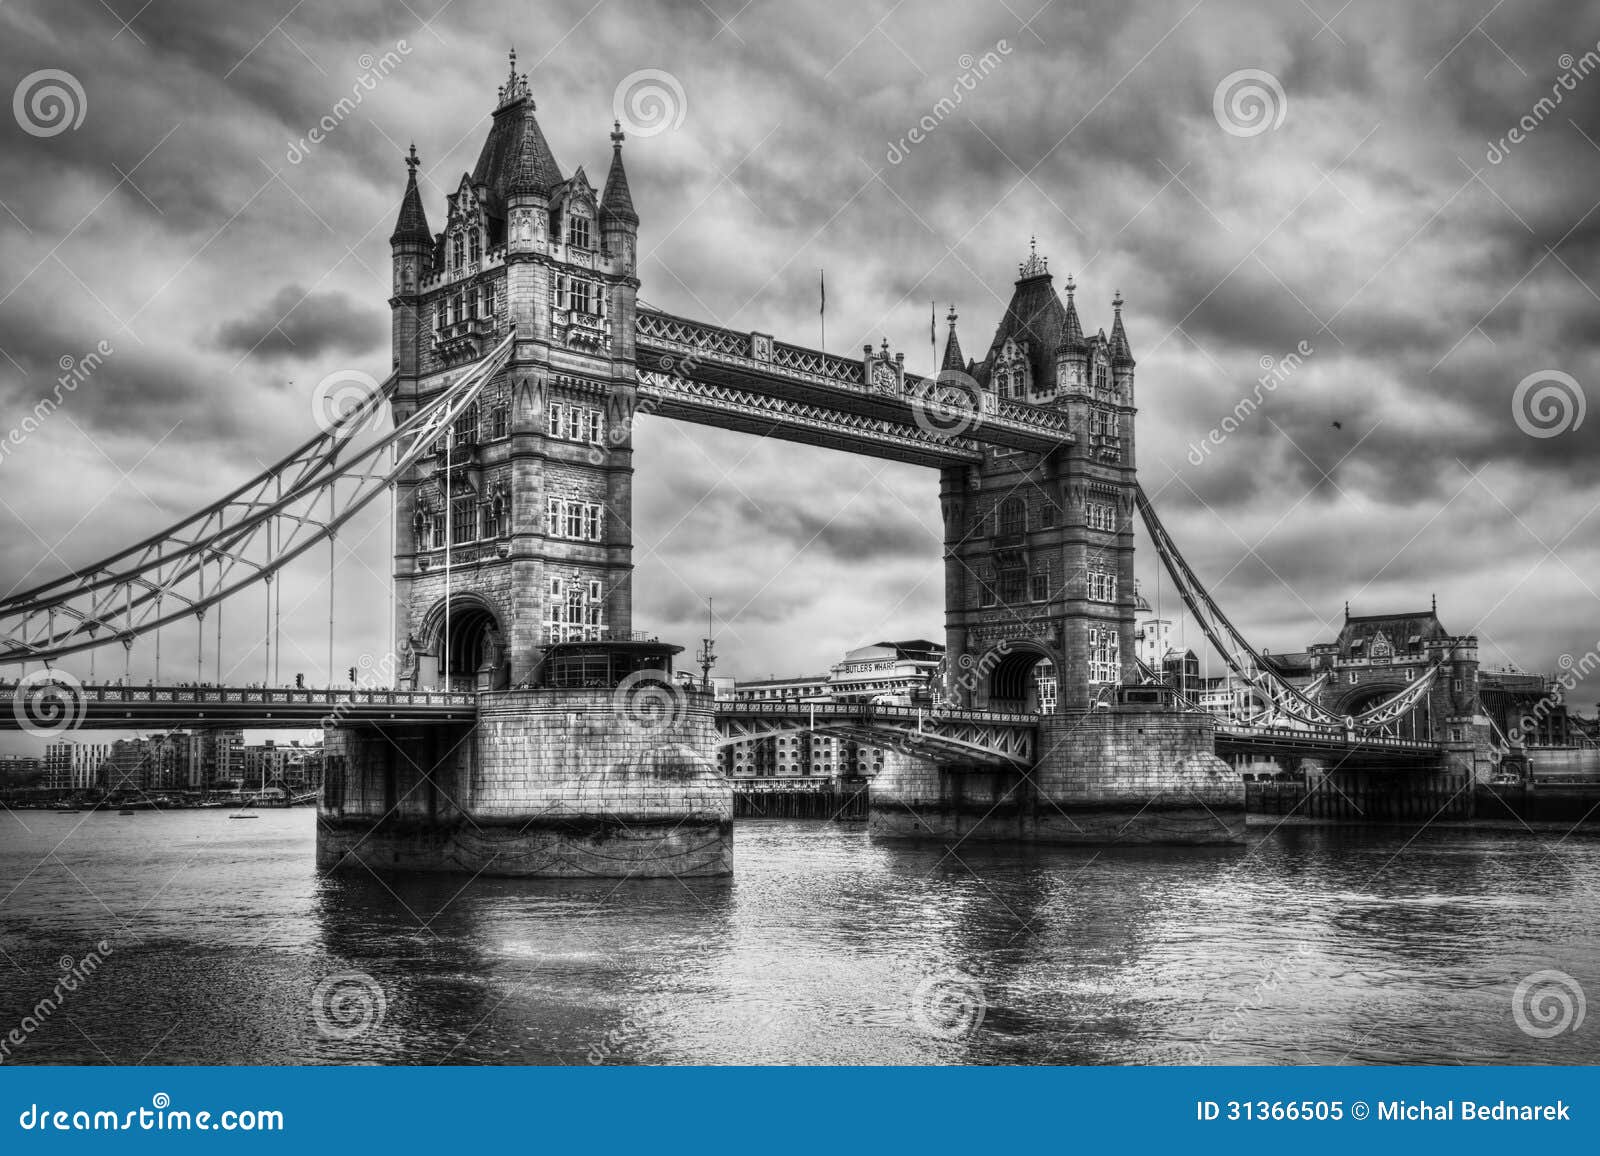 tower bridge in london, the uk. black and white